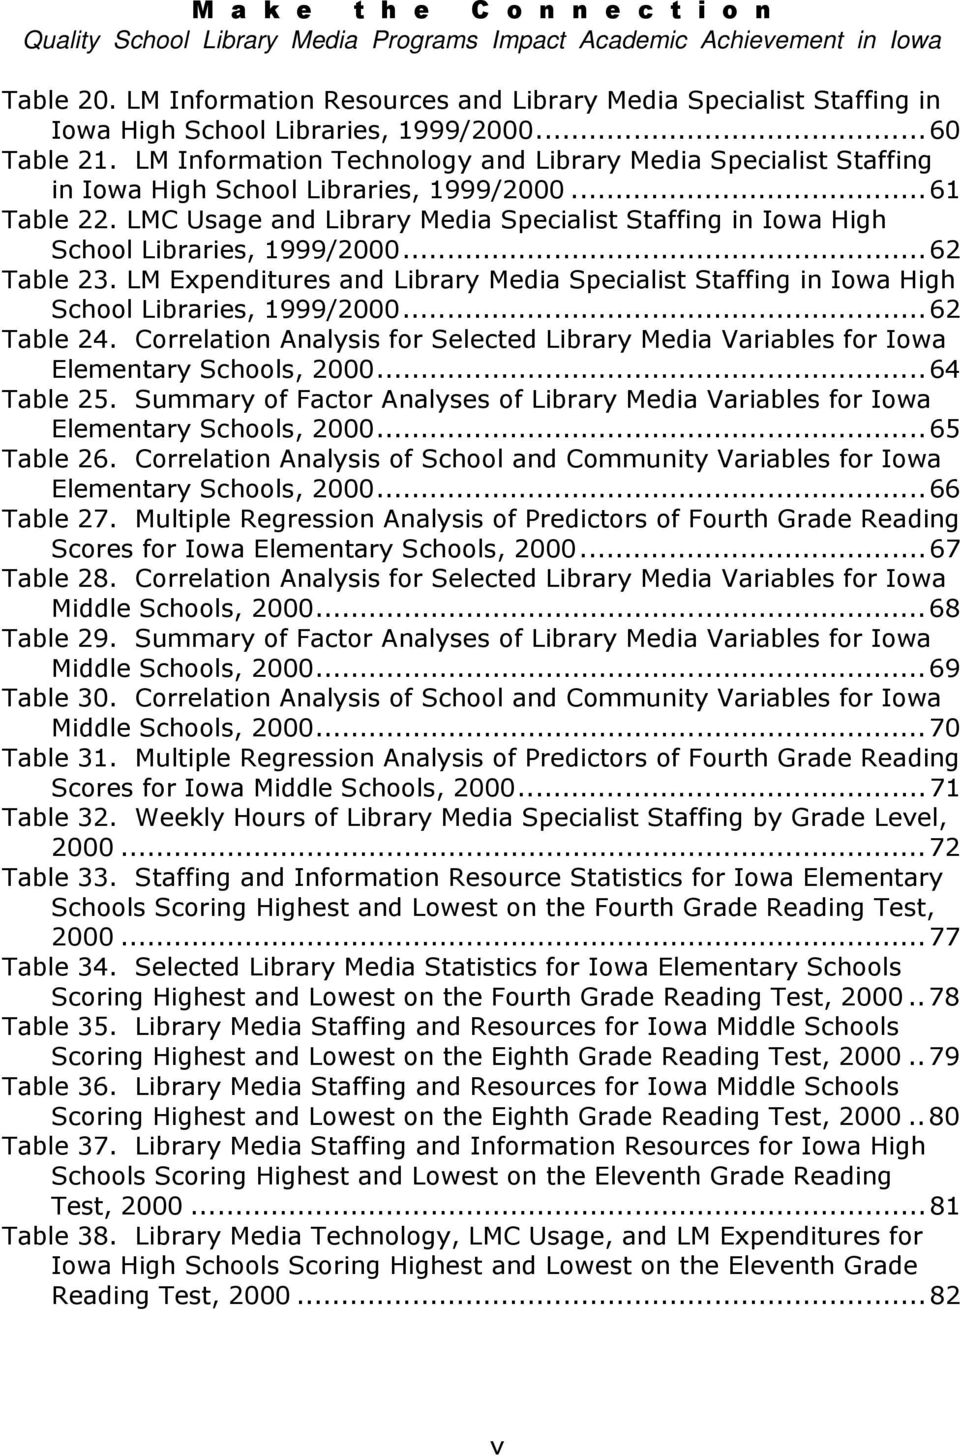 LMC Usage and Library Media Specialist Staffing in Iowa High School Libraries, 1999/2000...62 Table 23. LM Expenditures and Library Media Specialist Staffing in Iowa High School Libraries, 1999/2000.